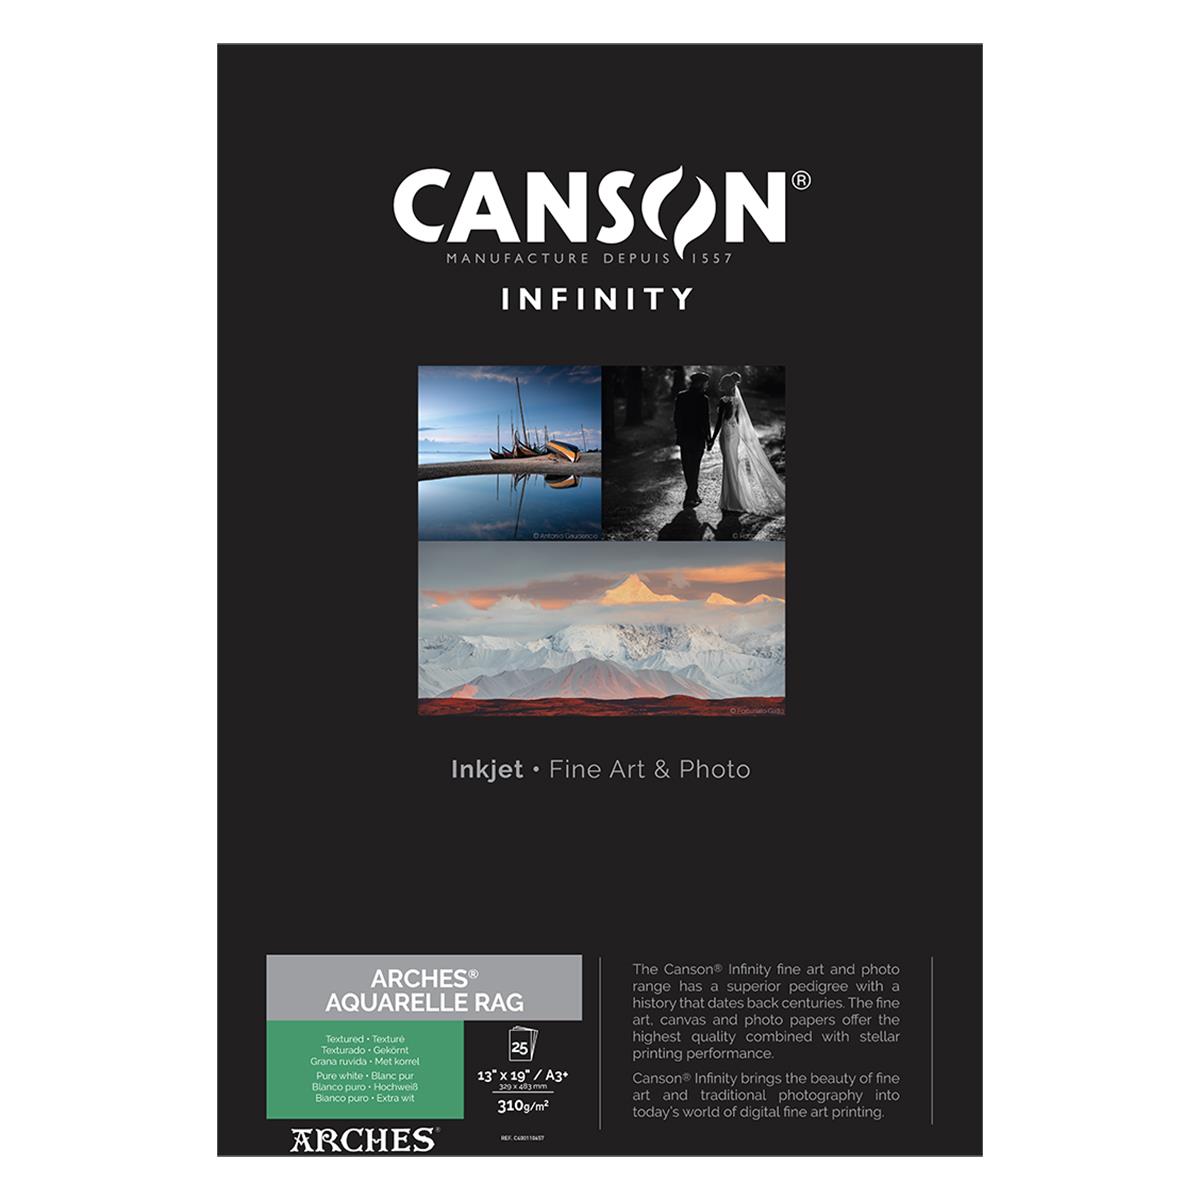 Image of Canson Infinity ARCHES Aquarelle Rag Matte Inkjet Paper